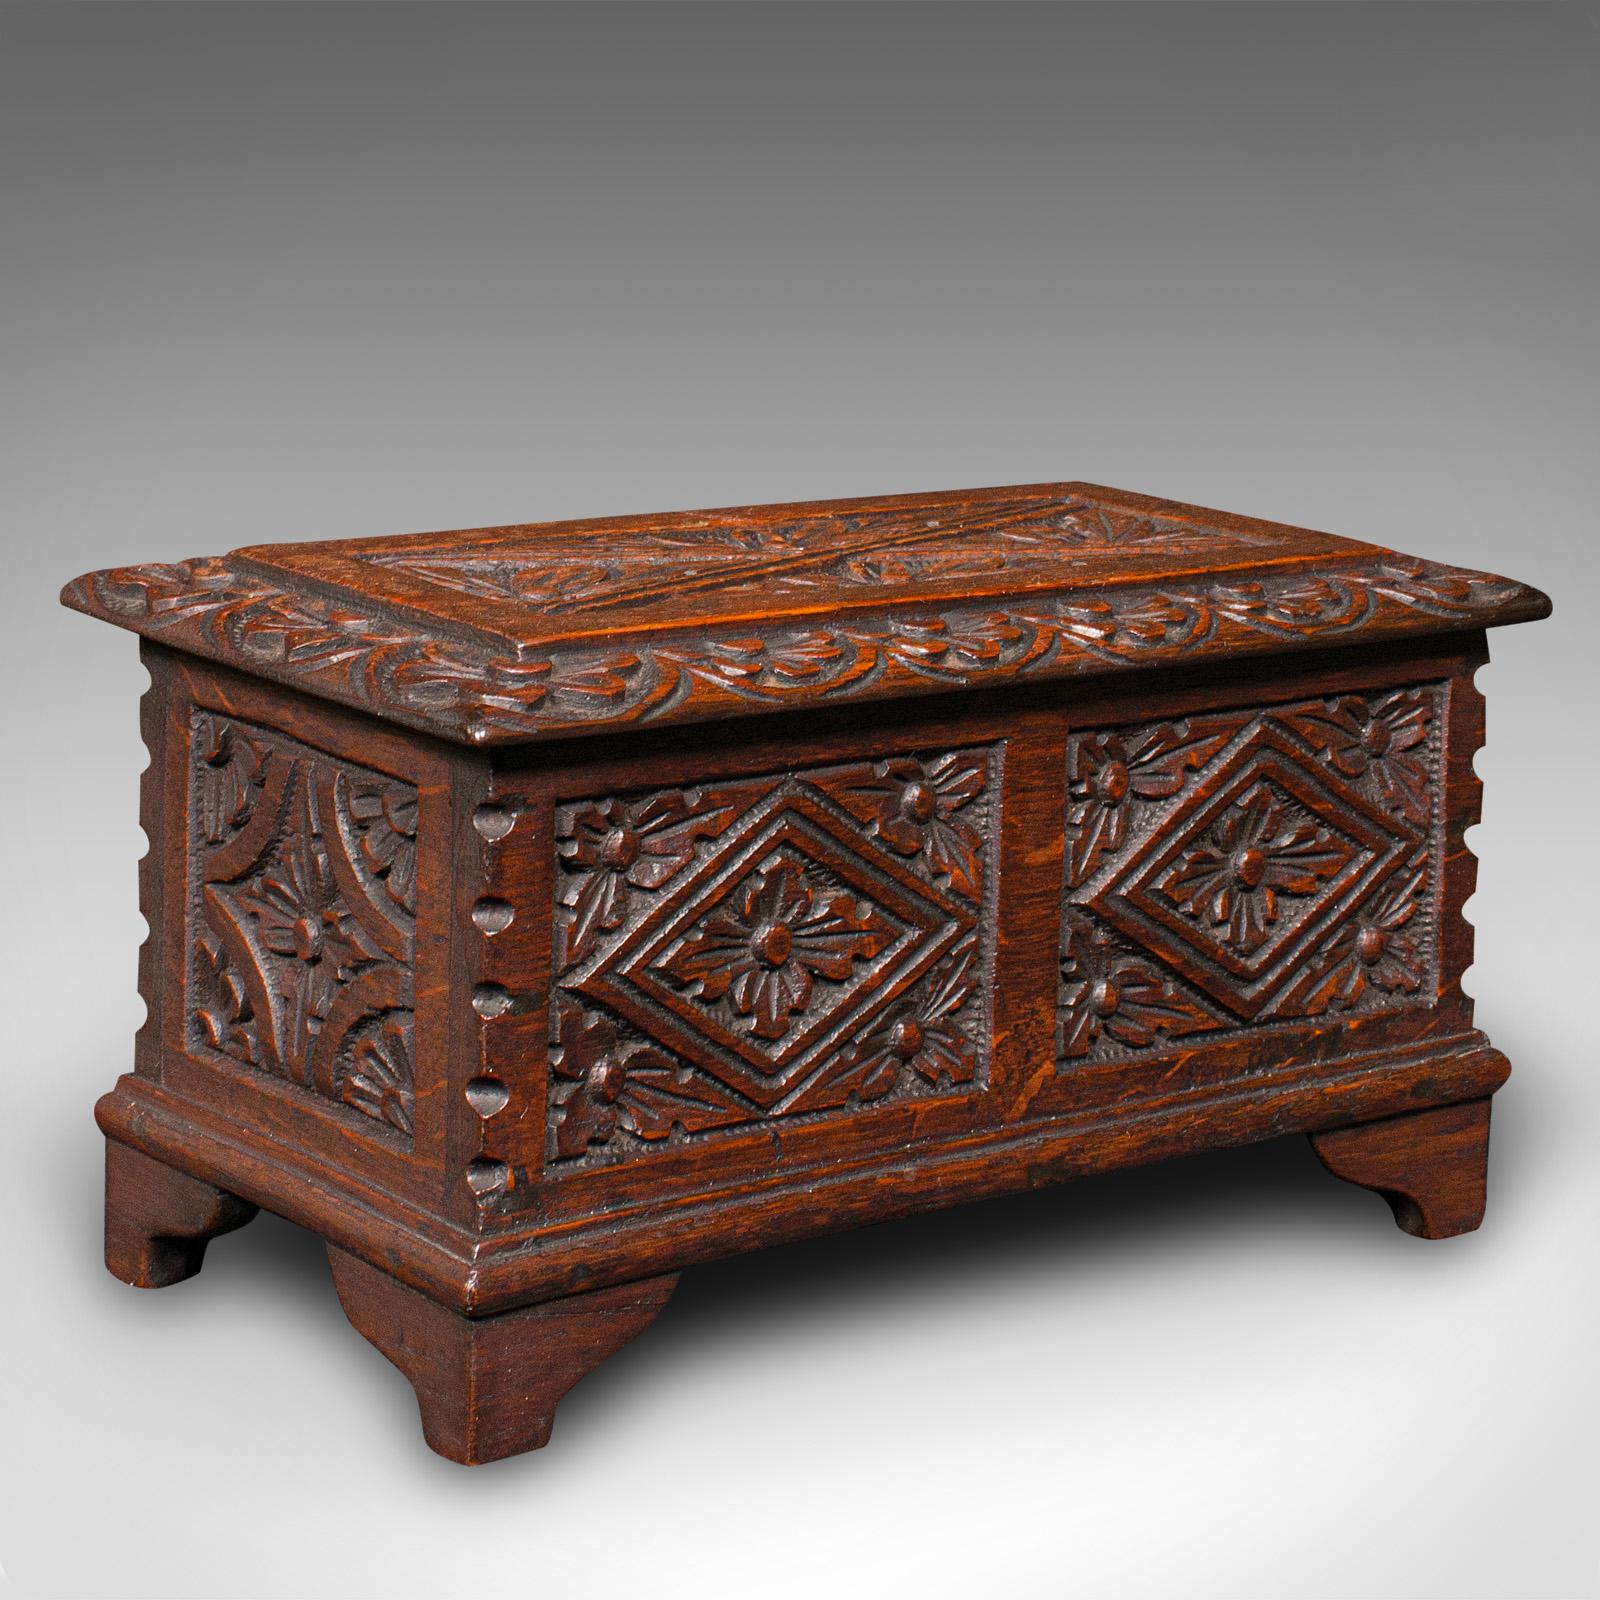 This is a small antique apprentice-piece chest. An Anglo-Indian, carved teak Colonial keepsake box, dating to the late Victorian period, circa 1880.

Petite scholar's miniature coffer with accomplished carved detailing
Displays a desirable aged